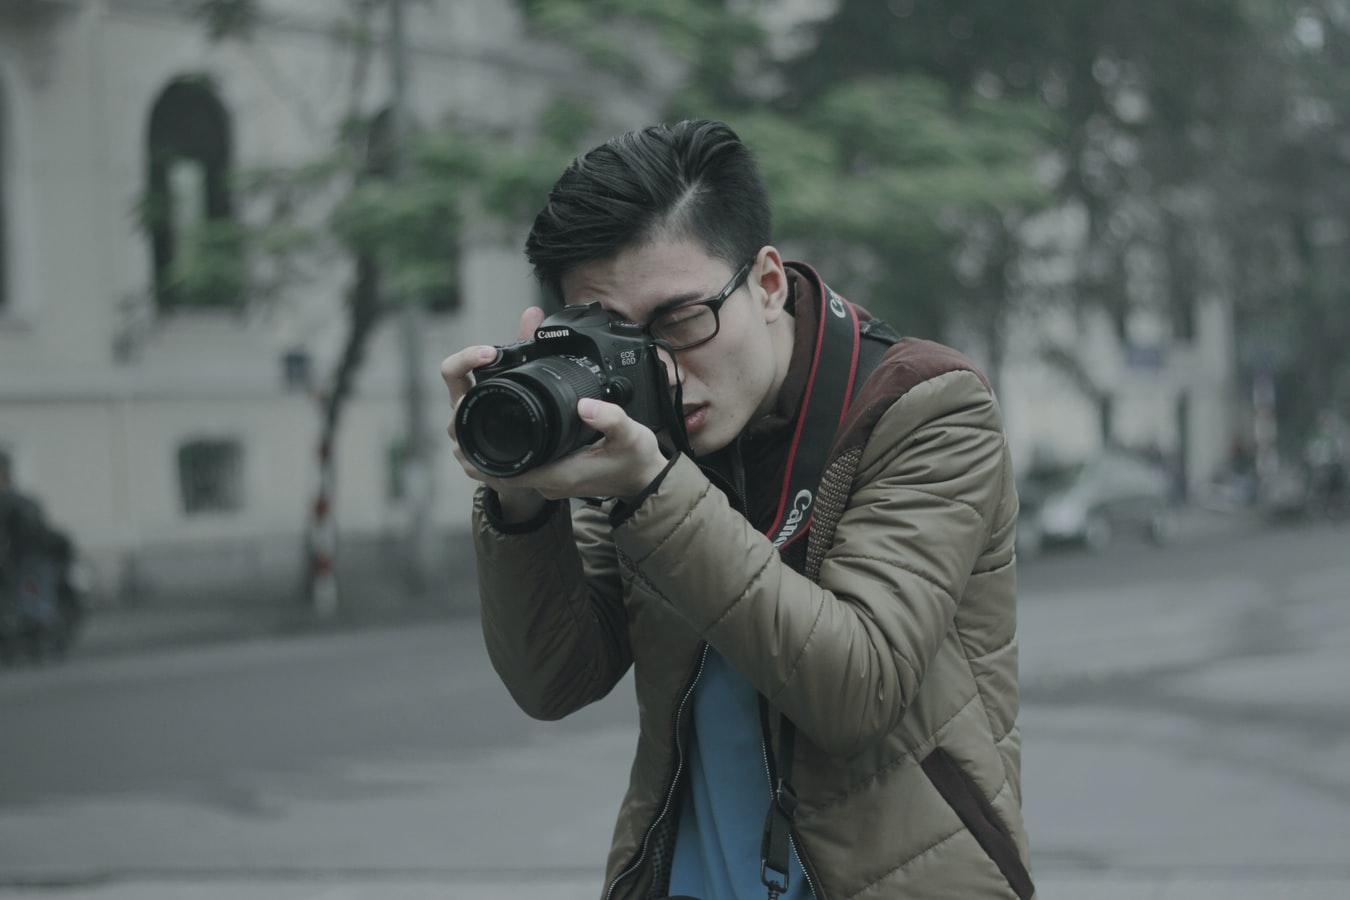 A man outside taking a picture on a camera - 5 Careers That Let You Be Creative At Work